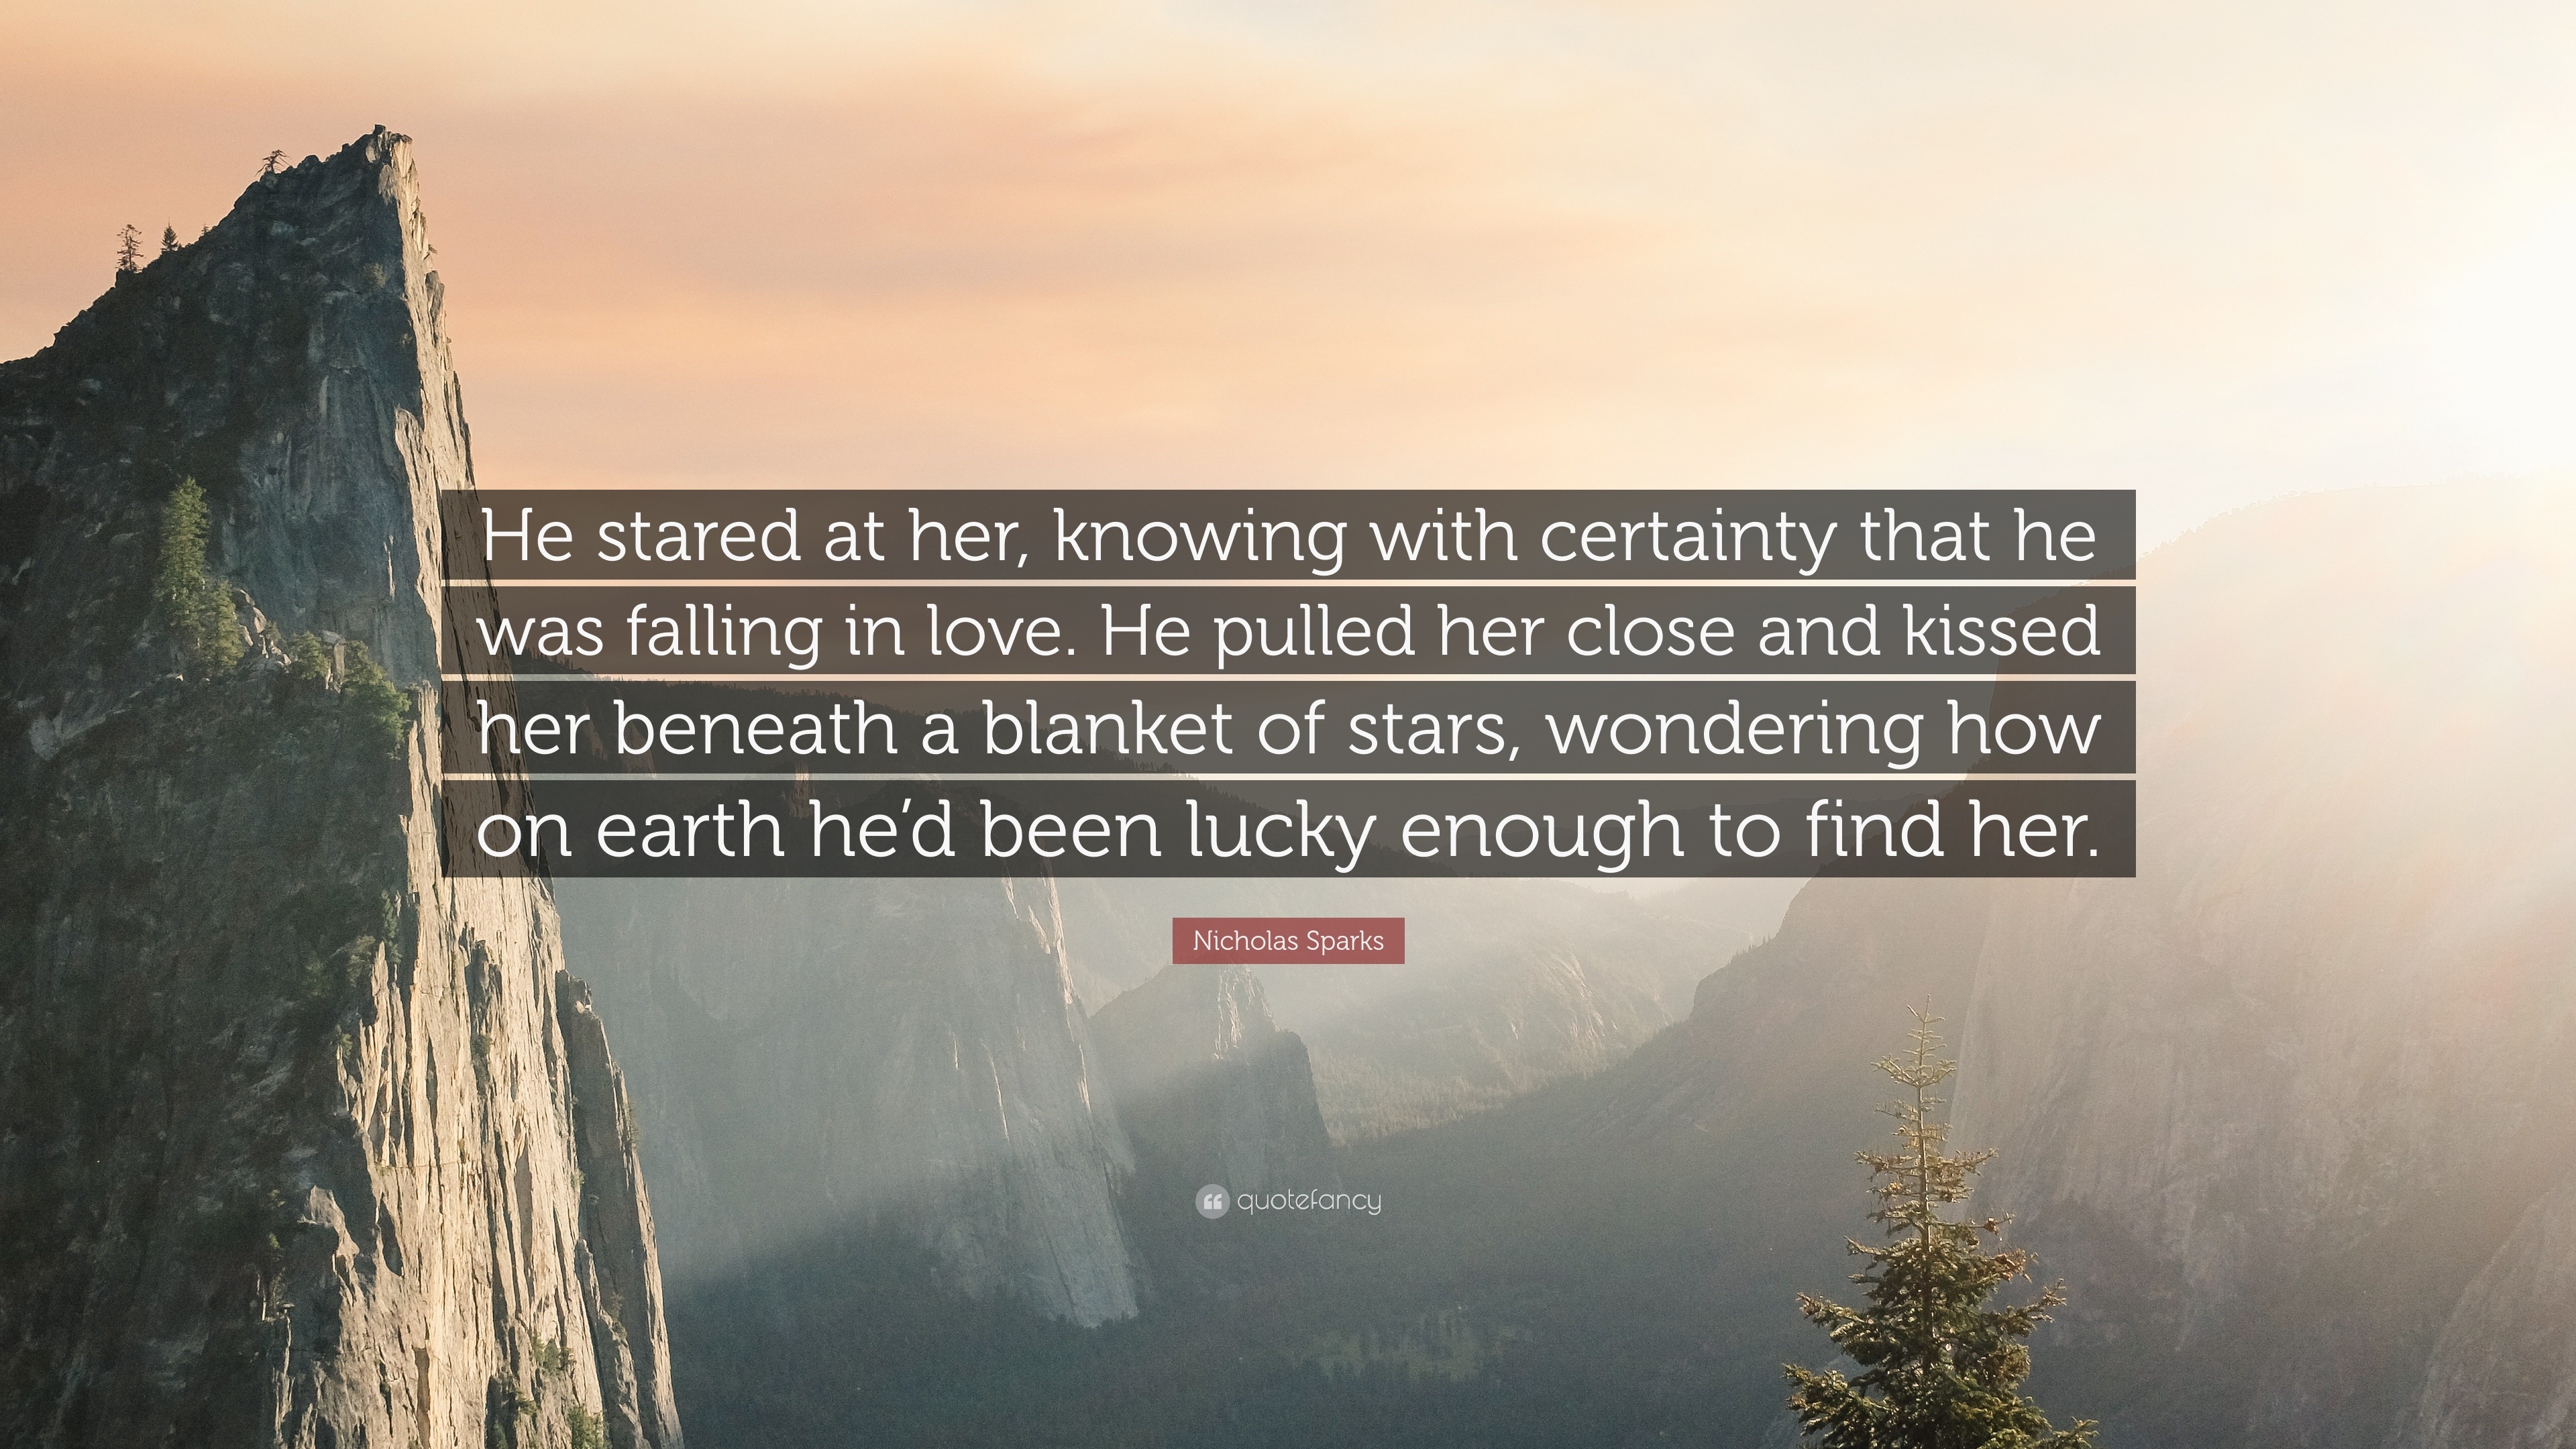 Nicholas Sparks Quote “He stared at her knowing with certainty that he was